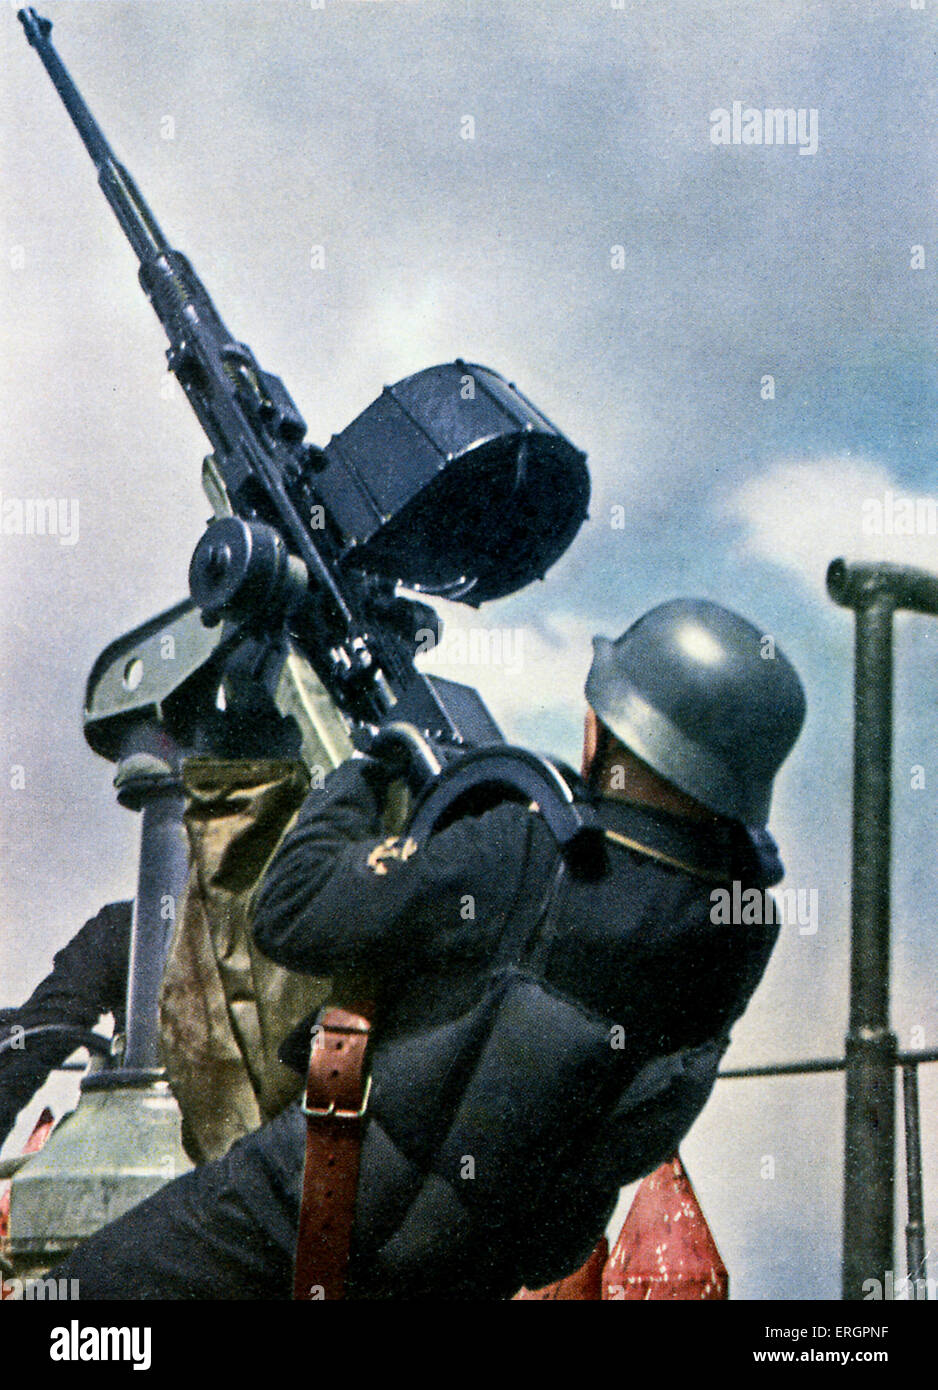 WW2 - Eastern Front. Protection from air attack. Gunner at sea pointing weapon into the sky. Stock Photo